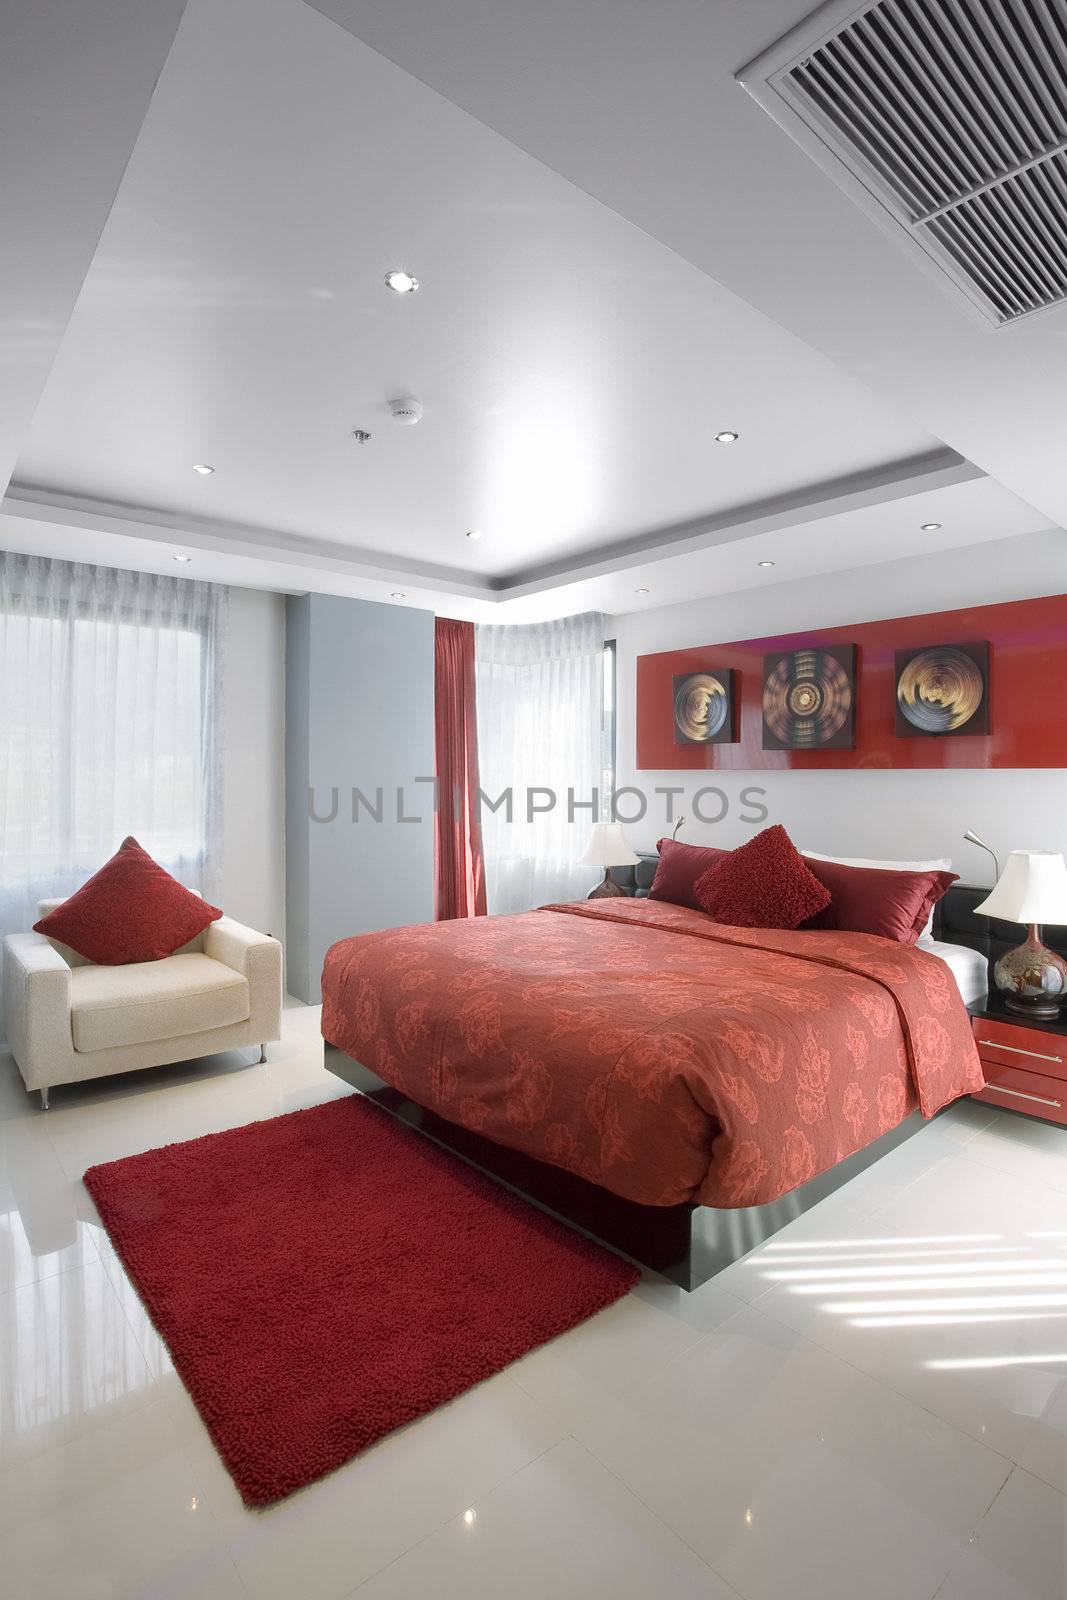 Panoramic view of nice stylish modern bedroom. Images on the wall were changed.